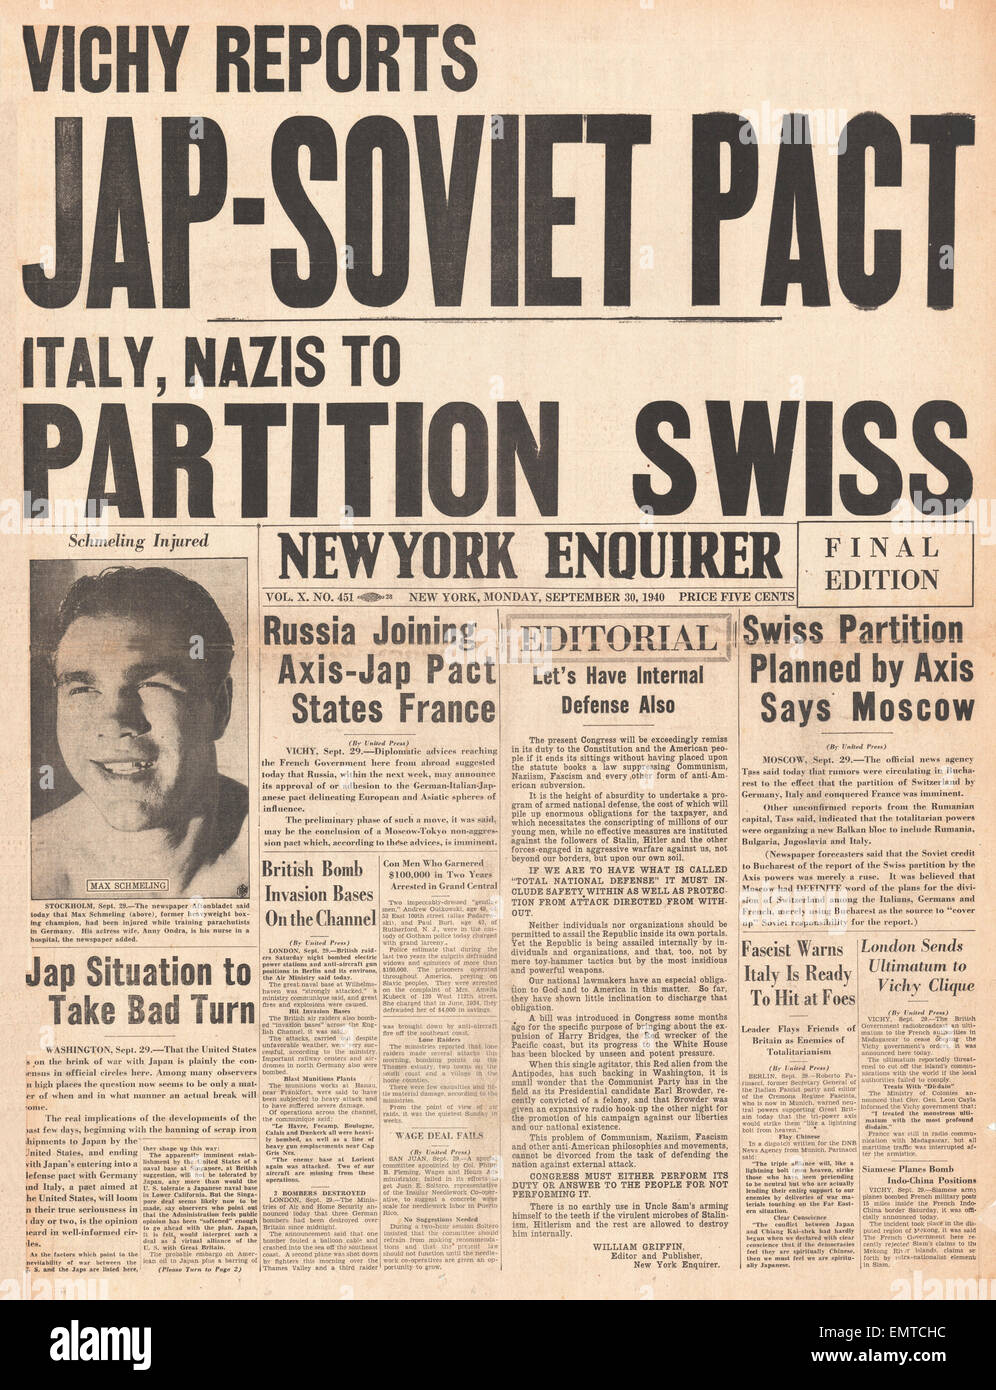 Image result for soviet - japan neutrality pact - 1940 newspaper